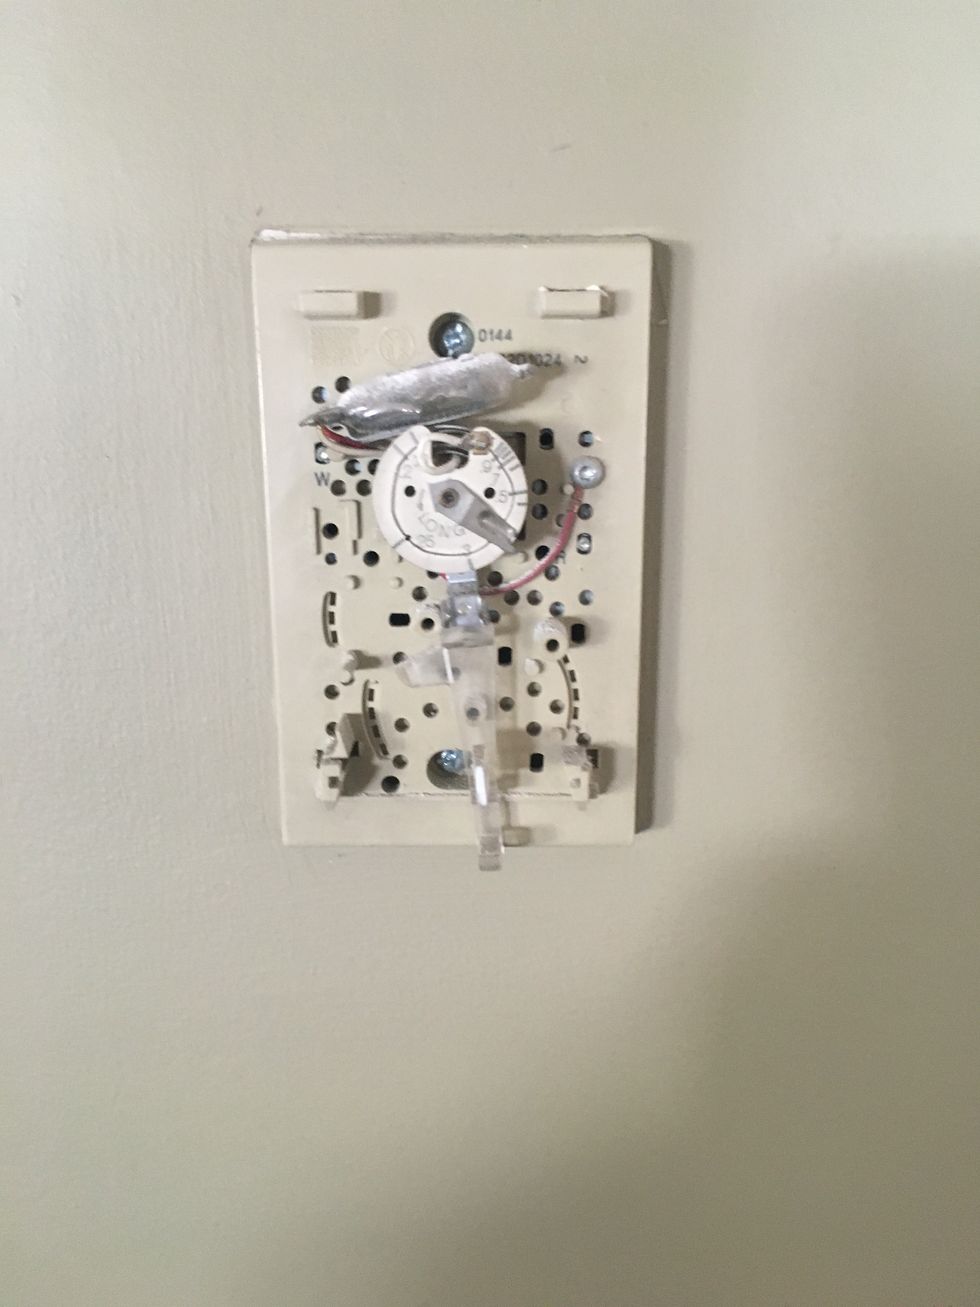 Old thermostats work without C-Wire.